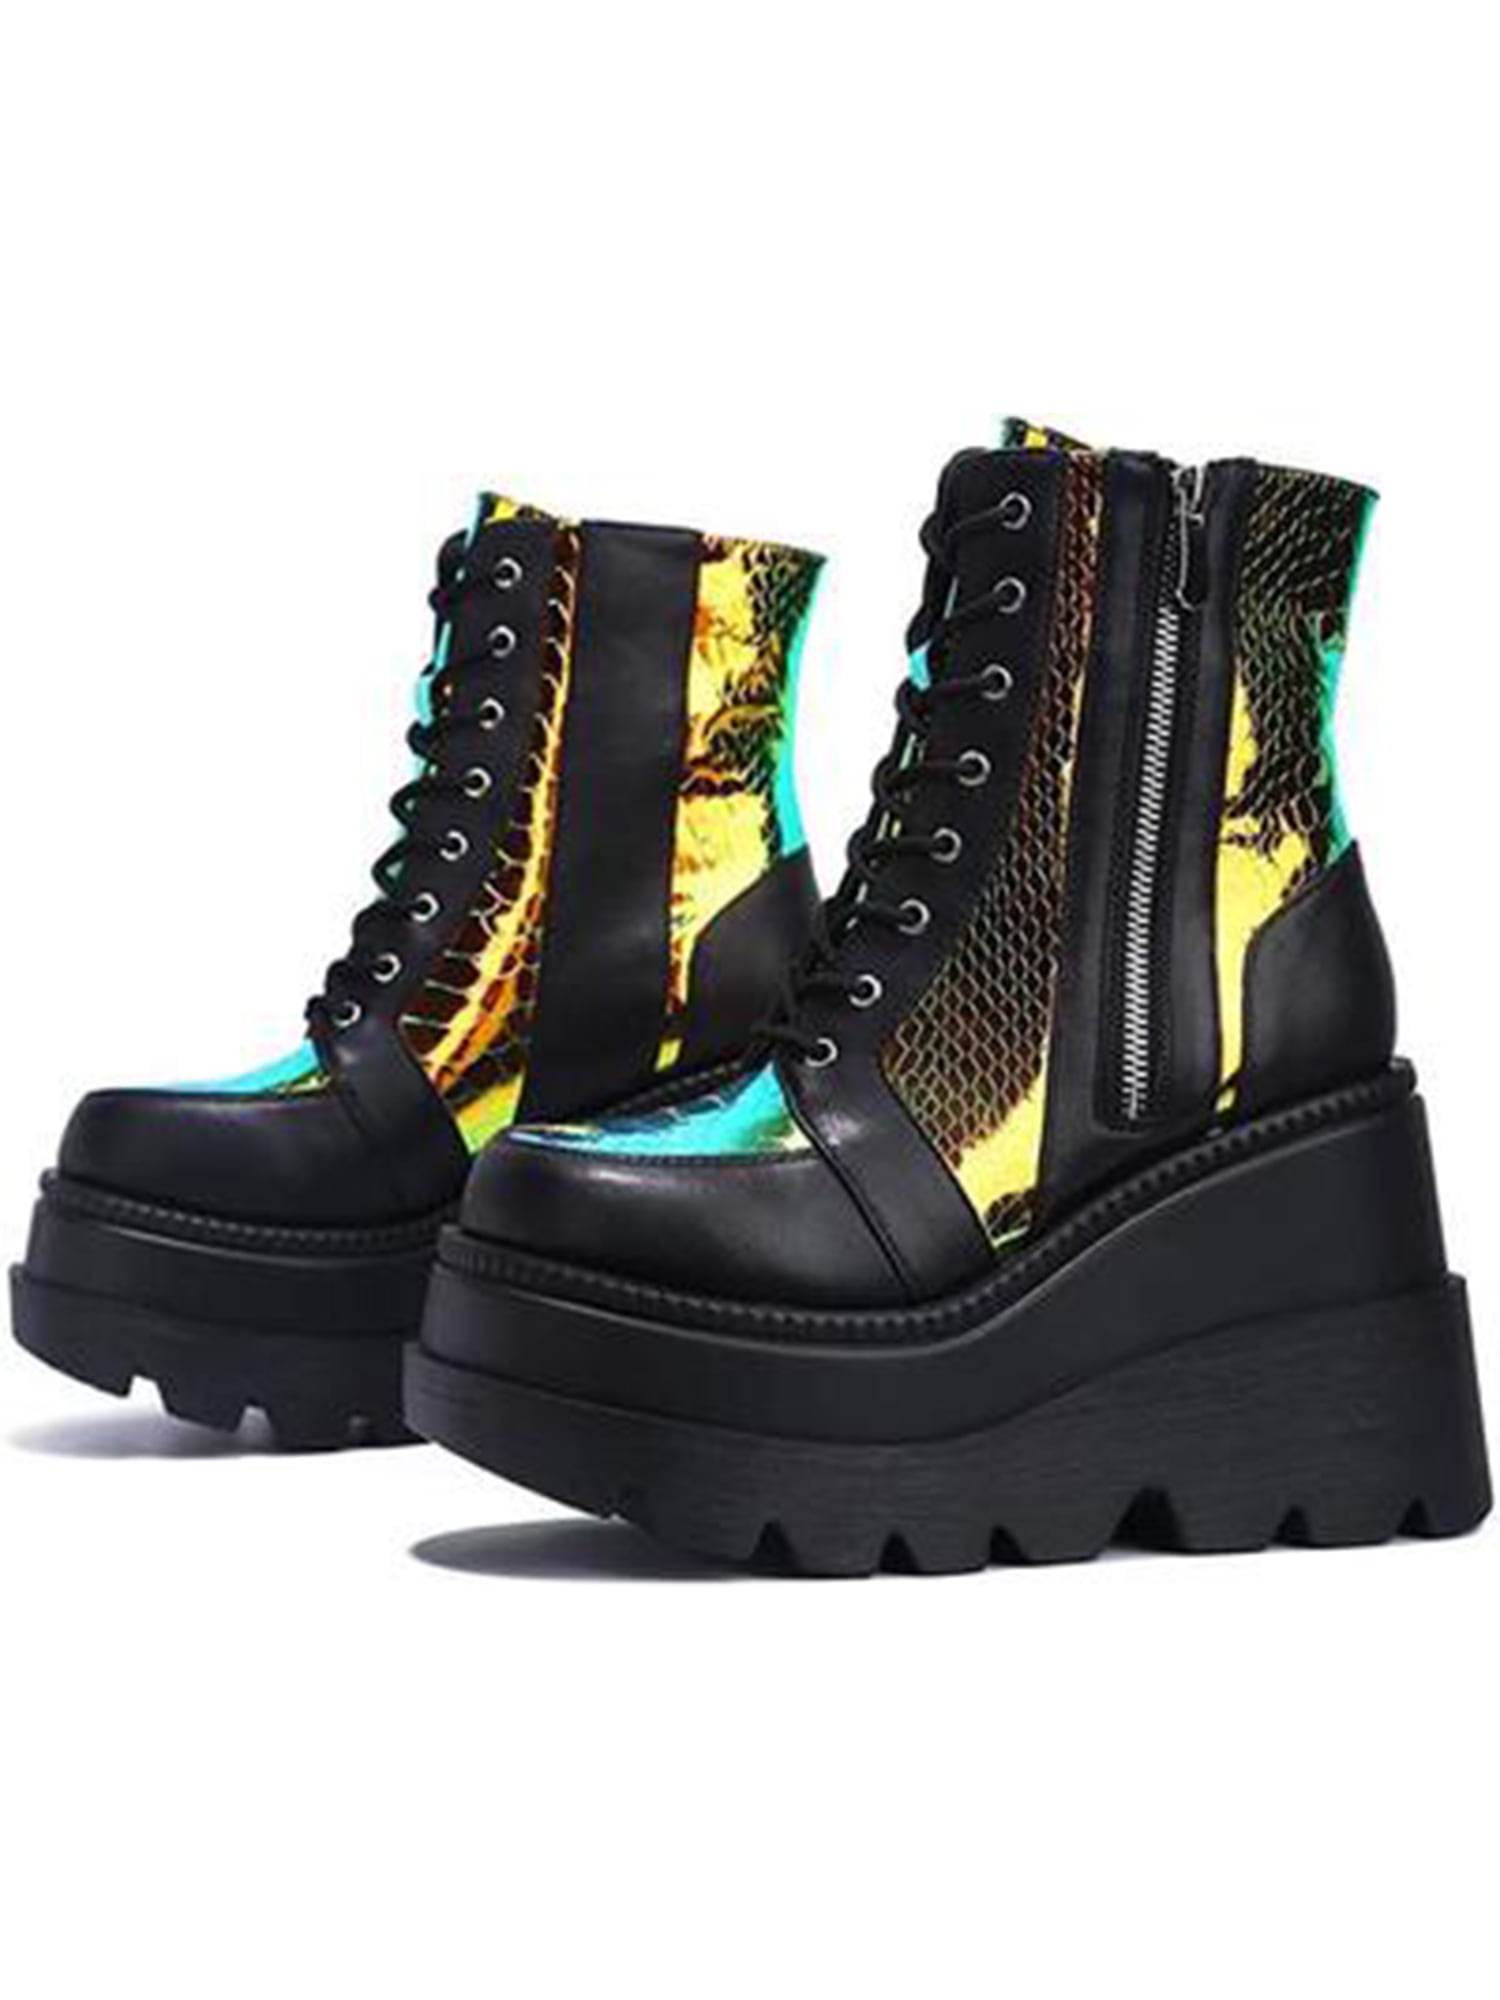 Details about   Women's buckle Platform punk chunky Heels Side Zip Ankle Boots Casual Shoes 